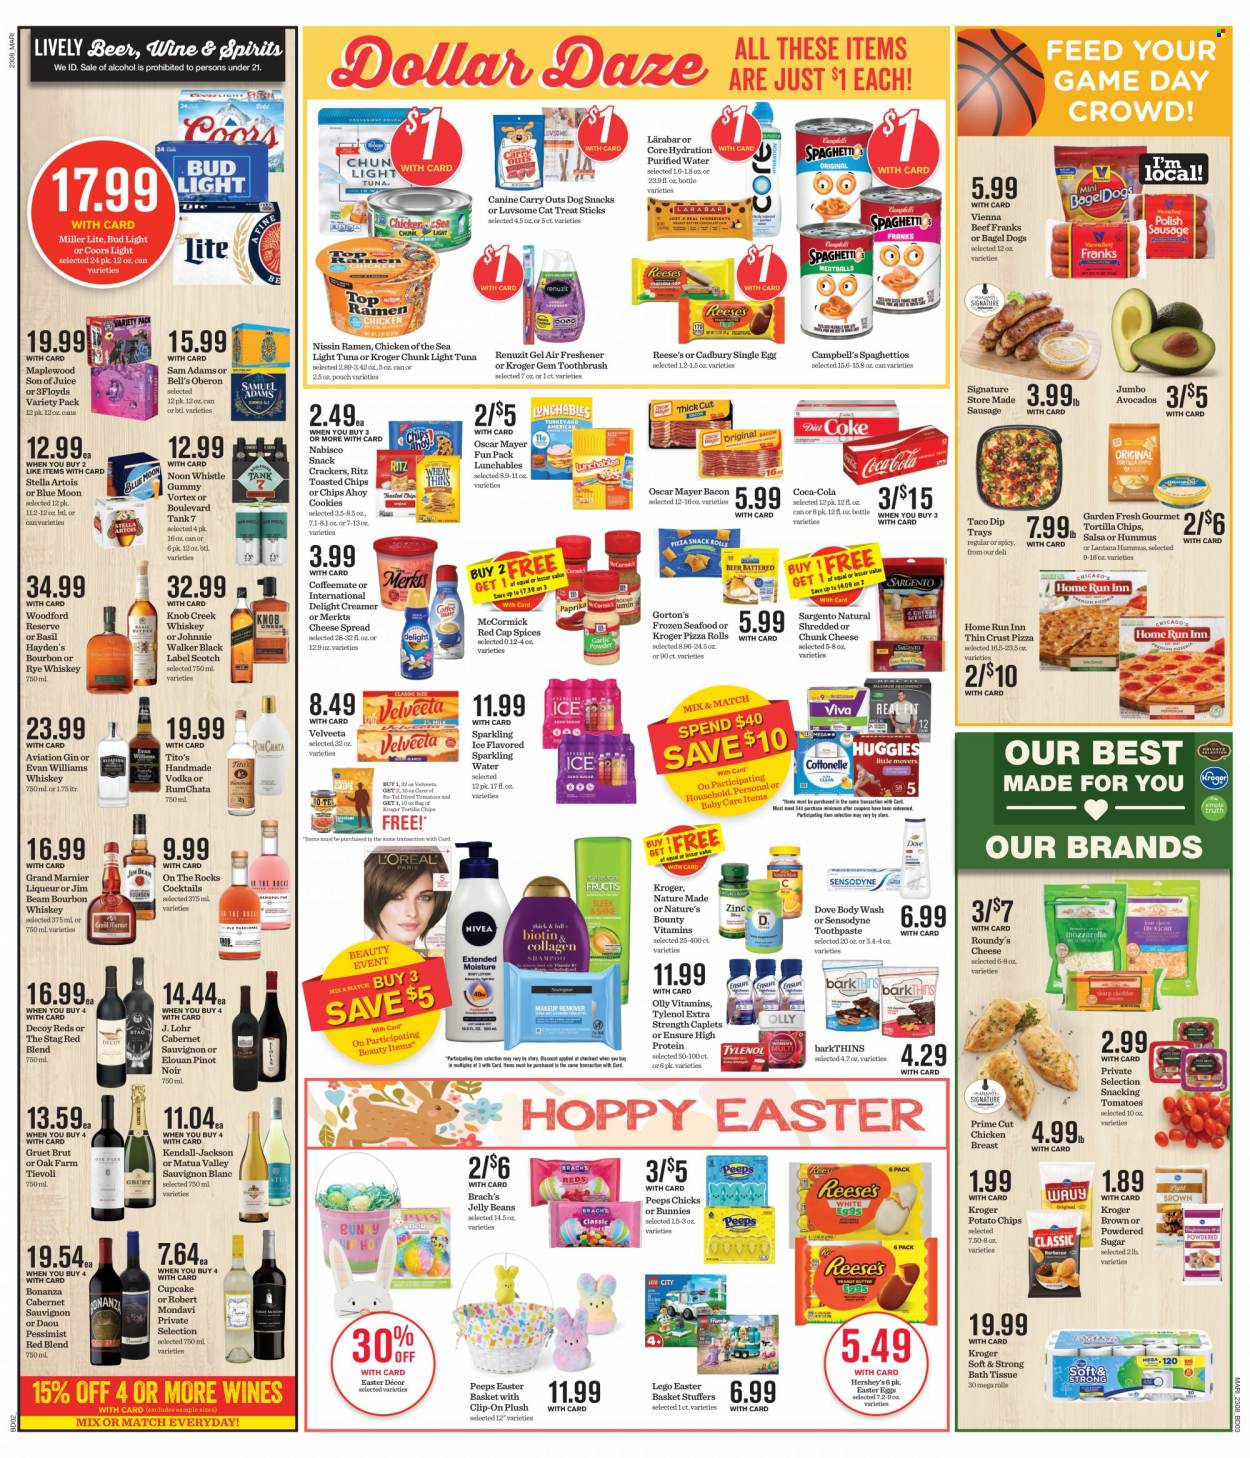 thumbnail - Mariano’s Flyer - 03/22/2023 - 03/28/2023 - Sales products - pizza rolls, cupcake, avocado, tuna, seafood, Gorton's, Campbell's, ramen, pizza, bagel dogs, Lunchables, Nissin, bacon, Oscar Mayer, sausage, hummus, cheese spread, chunk cheese, Sargento, creamer, dip, Reese's, Hershey's, cookies, Dove, snack, easter egg, crackers, Cadbury, jelly beans, Peeps, RITZ, tortilla chips, potato chips, sugar, icing sugar, light tuna, Chicken of the Sea, diced tomatoes, salsa, Coca-Cola, juice, sparkling water, water, Cabernet Sauvignon, red wine, white wine, wine, Pinot Noir, Sauvignon Blanc, bourbon, gin, Grand Marnier, liqueur, vodka, whiskey, Johnnie Walker, Jim Beam, bourbon whiskey, whisky, beer, Stella Artois, Bud Light, chicken breasts, basket, Renuzit, air freshener, easter decor, easter basket, LEGO, Nature Made, Nature's Bounty, Tylenol, Miller Lite, Coors, Blue Moon. Page 5.